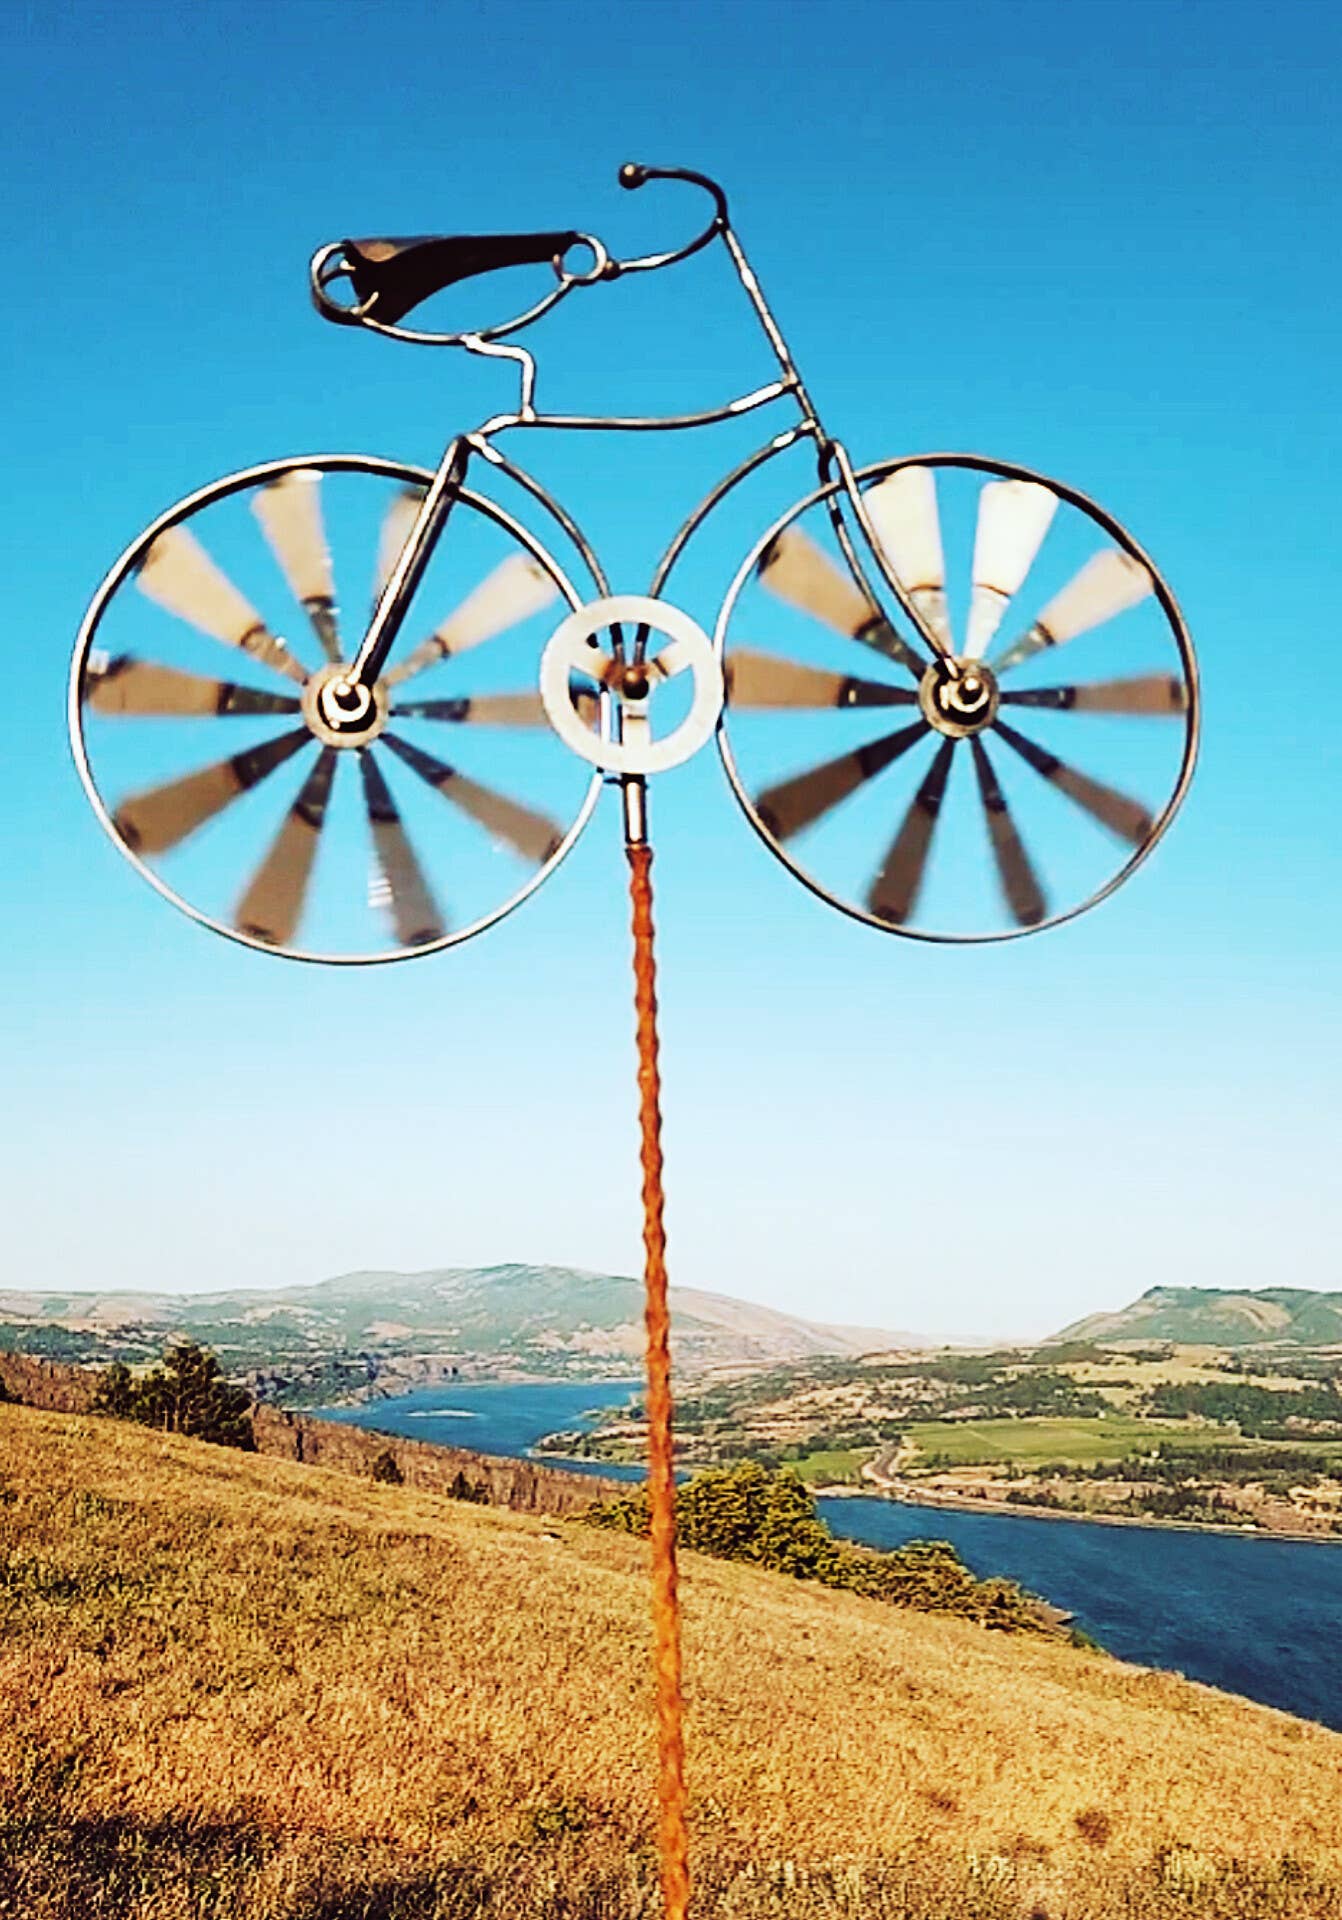 Rusty Bicycle Spinner